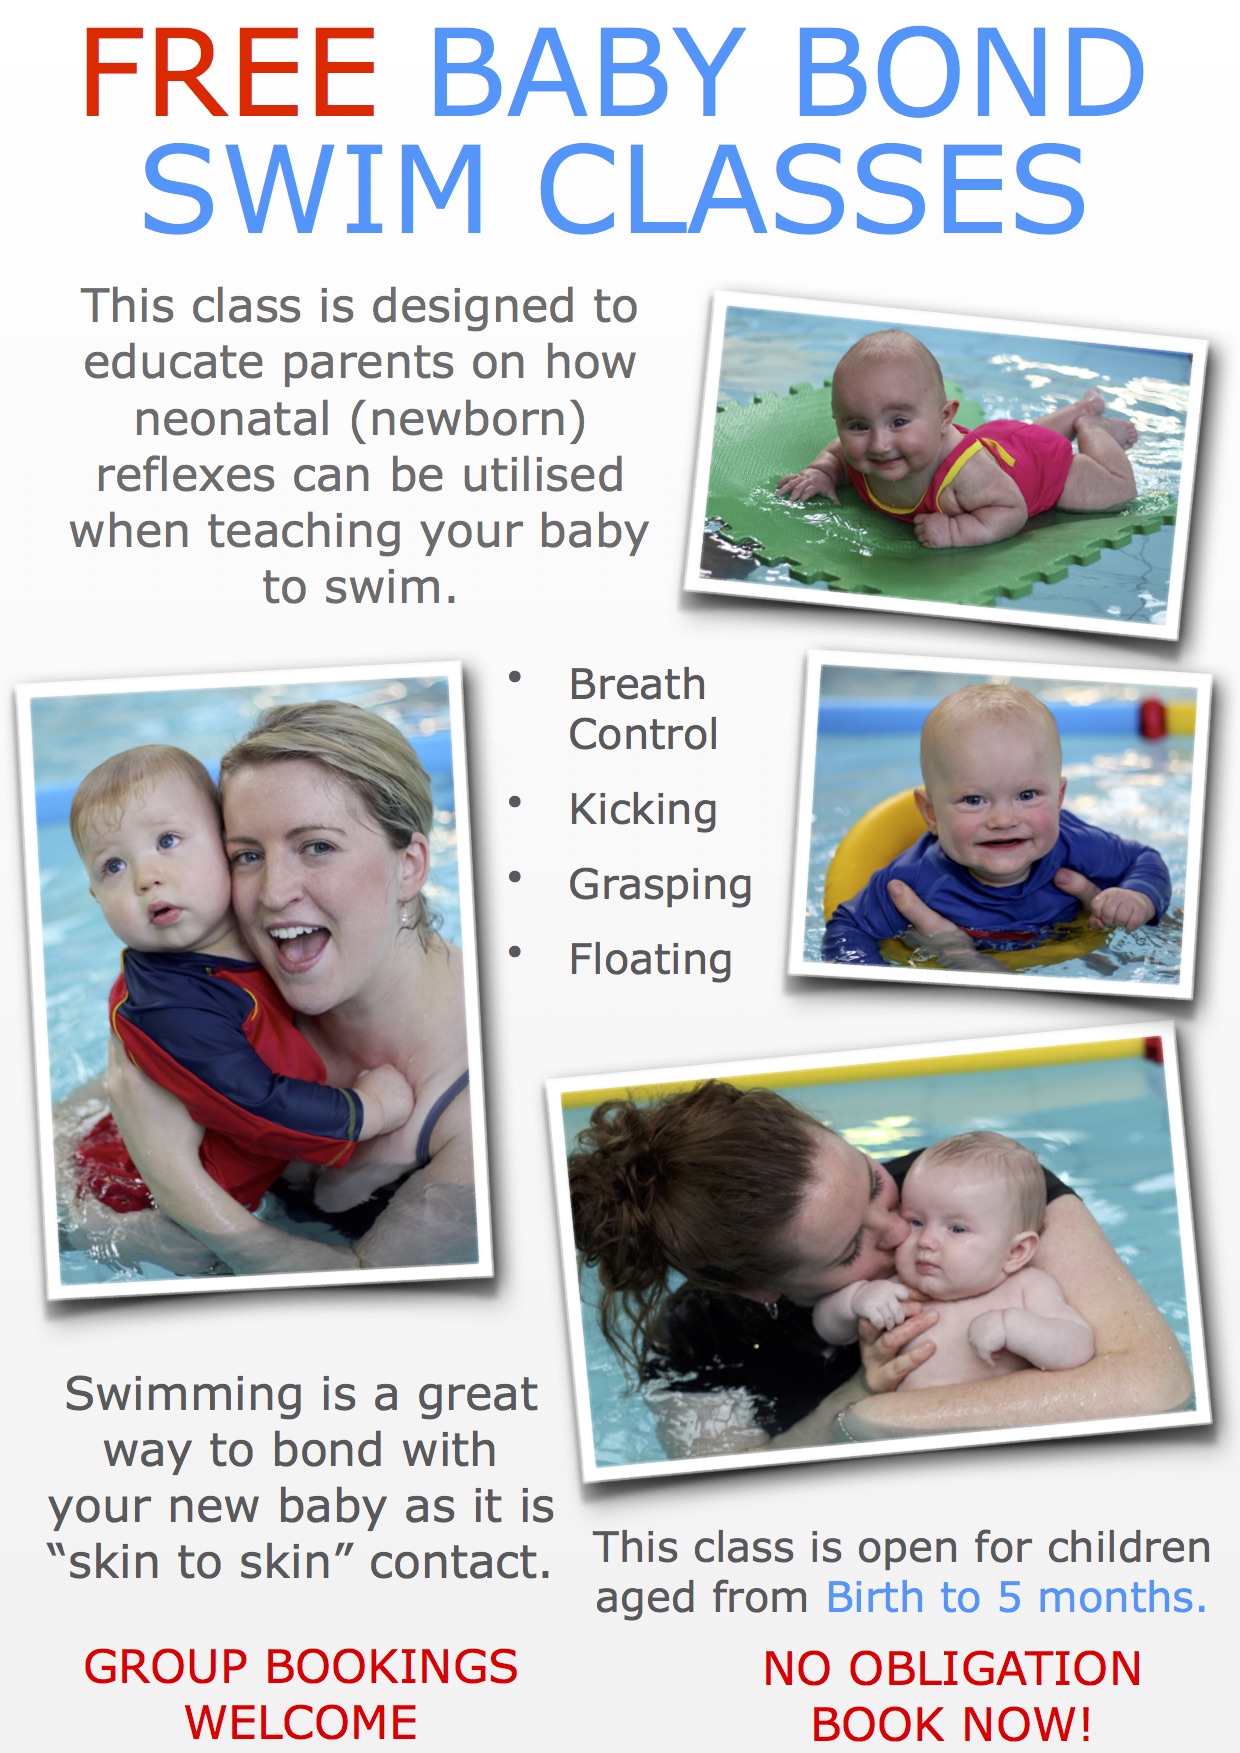 This class is designed to educate parents on how neonatal (newborn) reflexes can be utilised when teaching your baby to swim. Breath Control Kicking Grasping Floating Swimming is a great way to bond with your new baby as it is “skin to skin” contact. This class is open for children aged from Birth to 5 months.